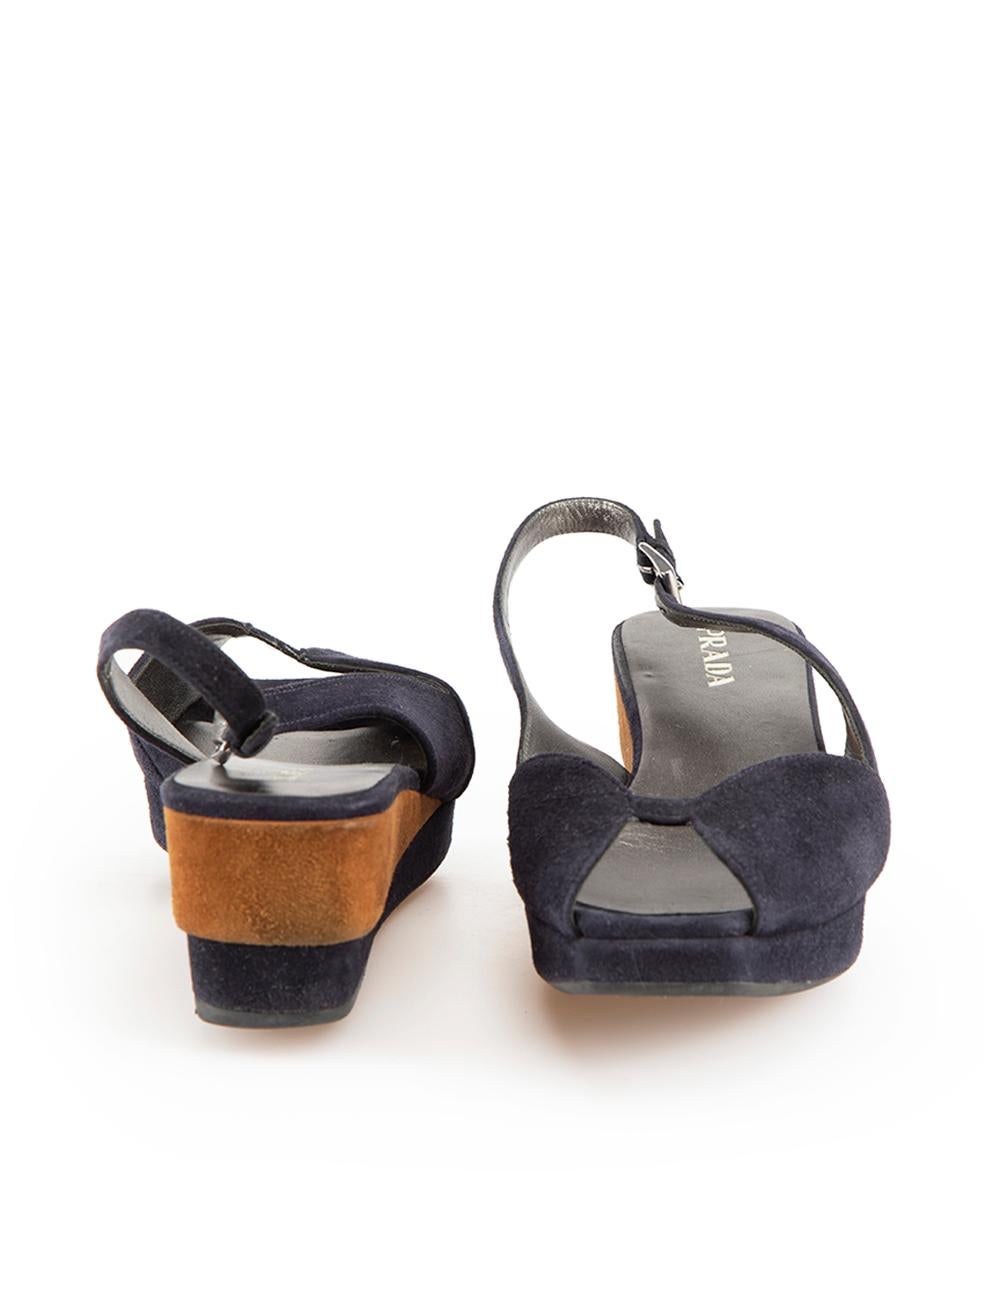 Prada Navy Suede Peep-Toe Slingback Wedges Size IT 39.5 In Good Condition For Sale In London, GB